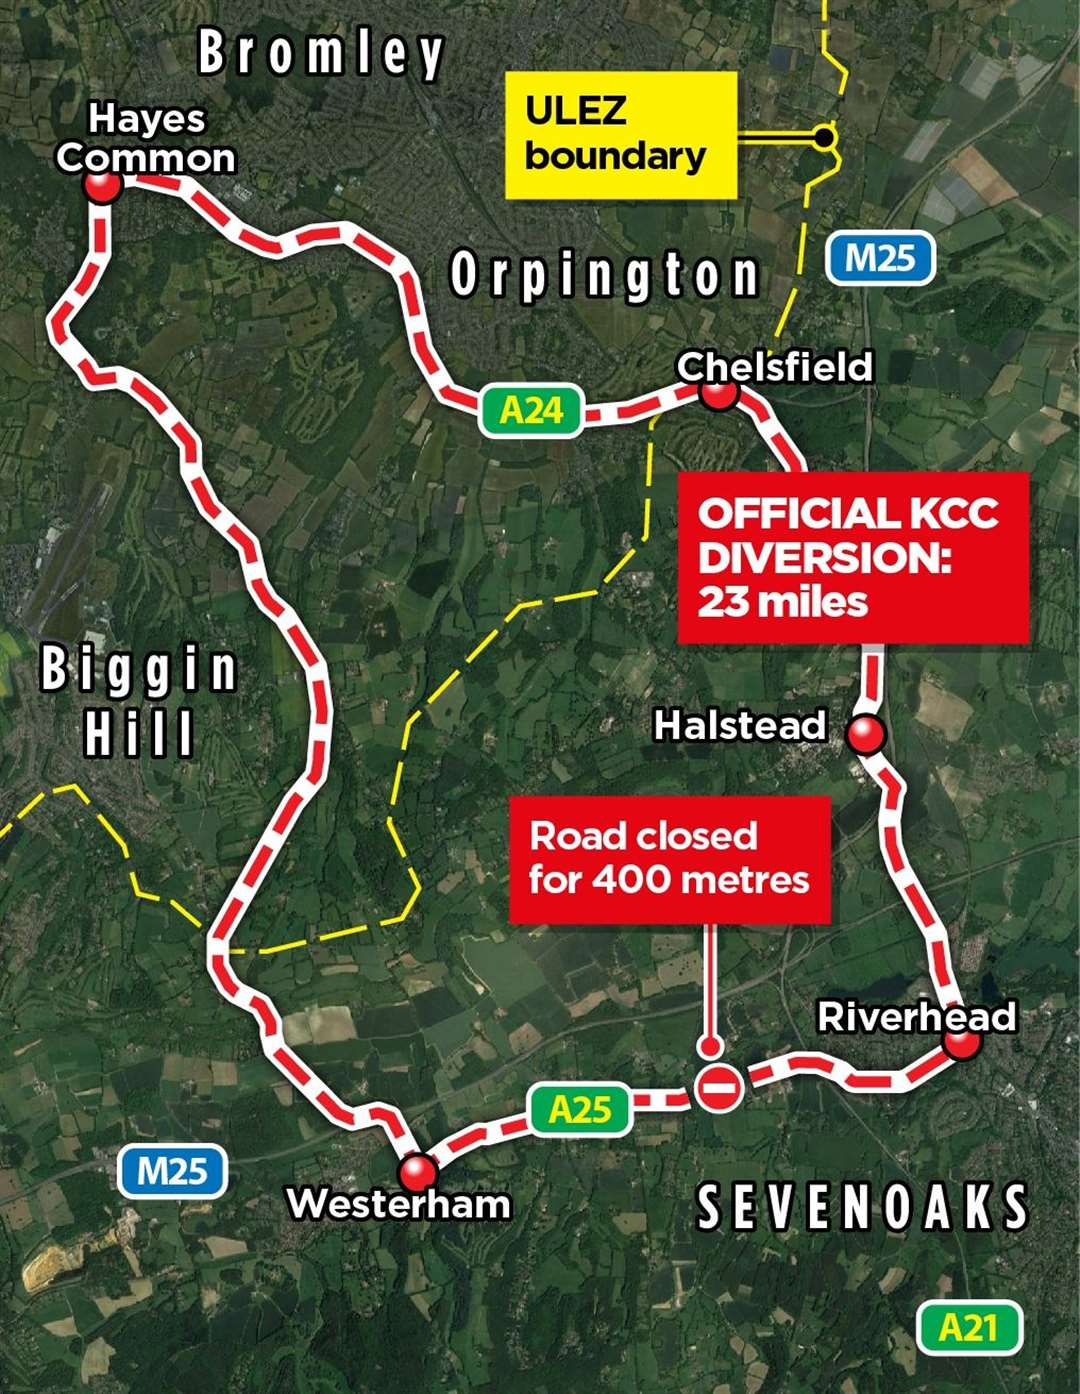 Official detour given to avoid 400m closure on A25 Main Road in Sundridge